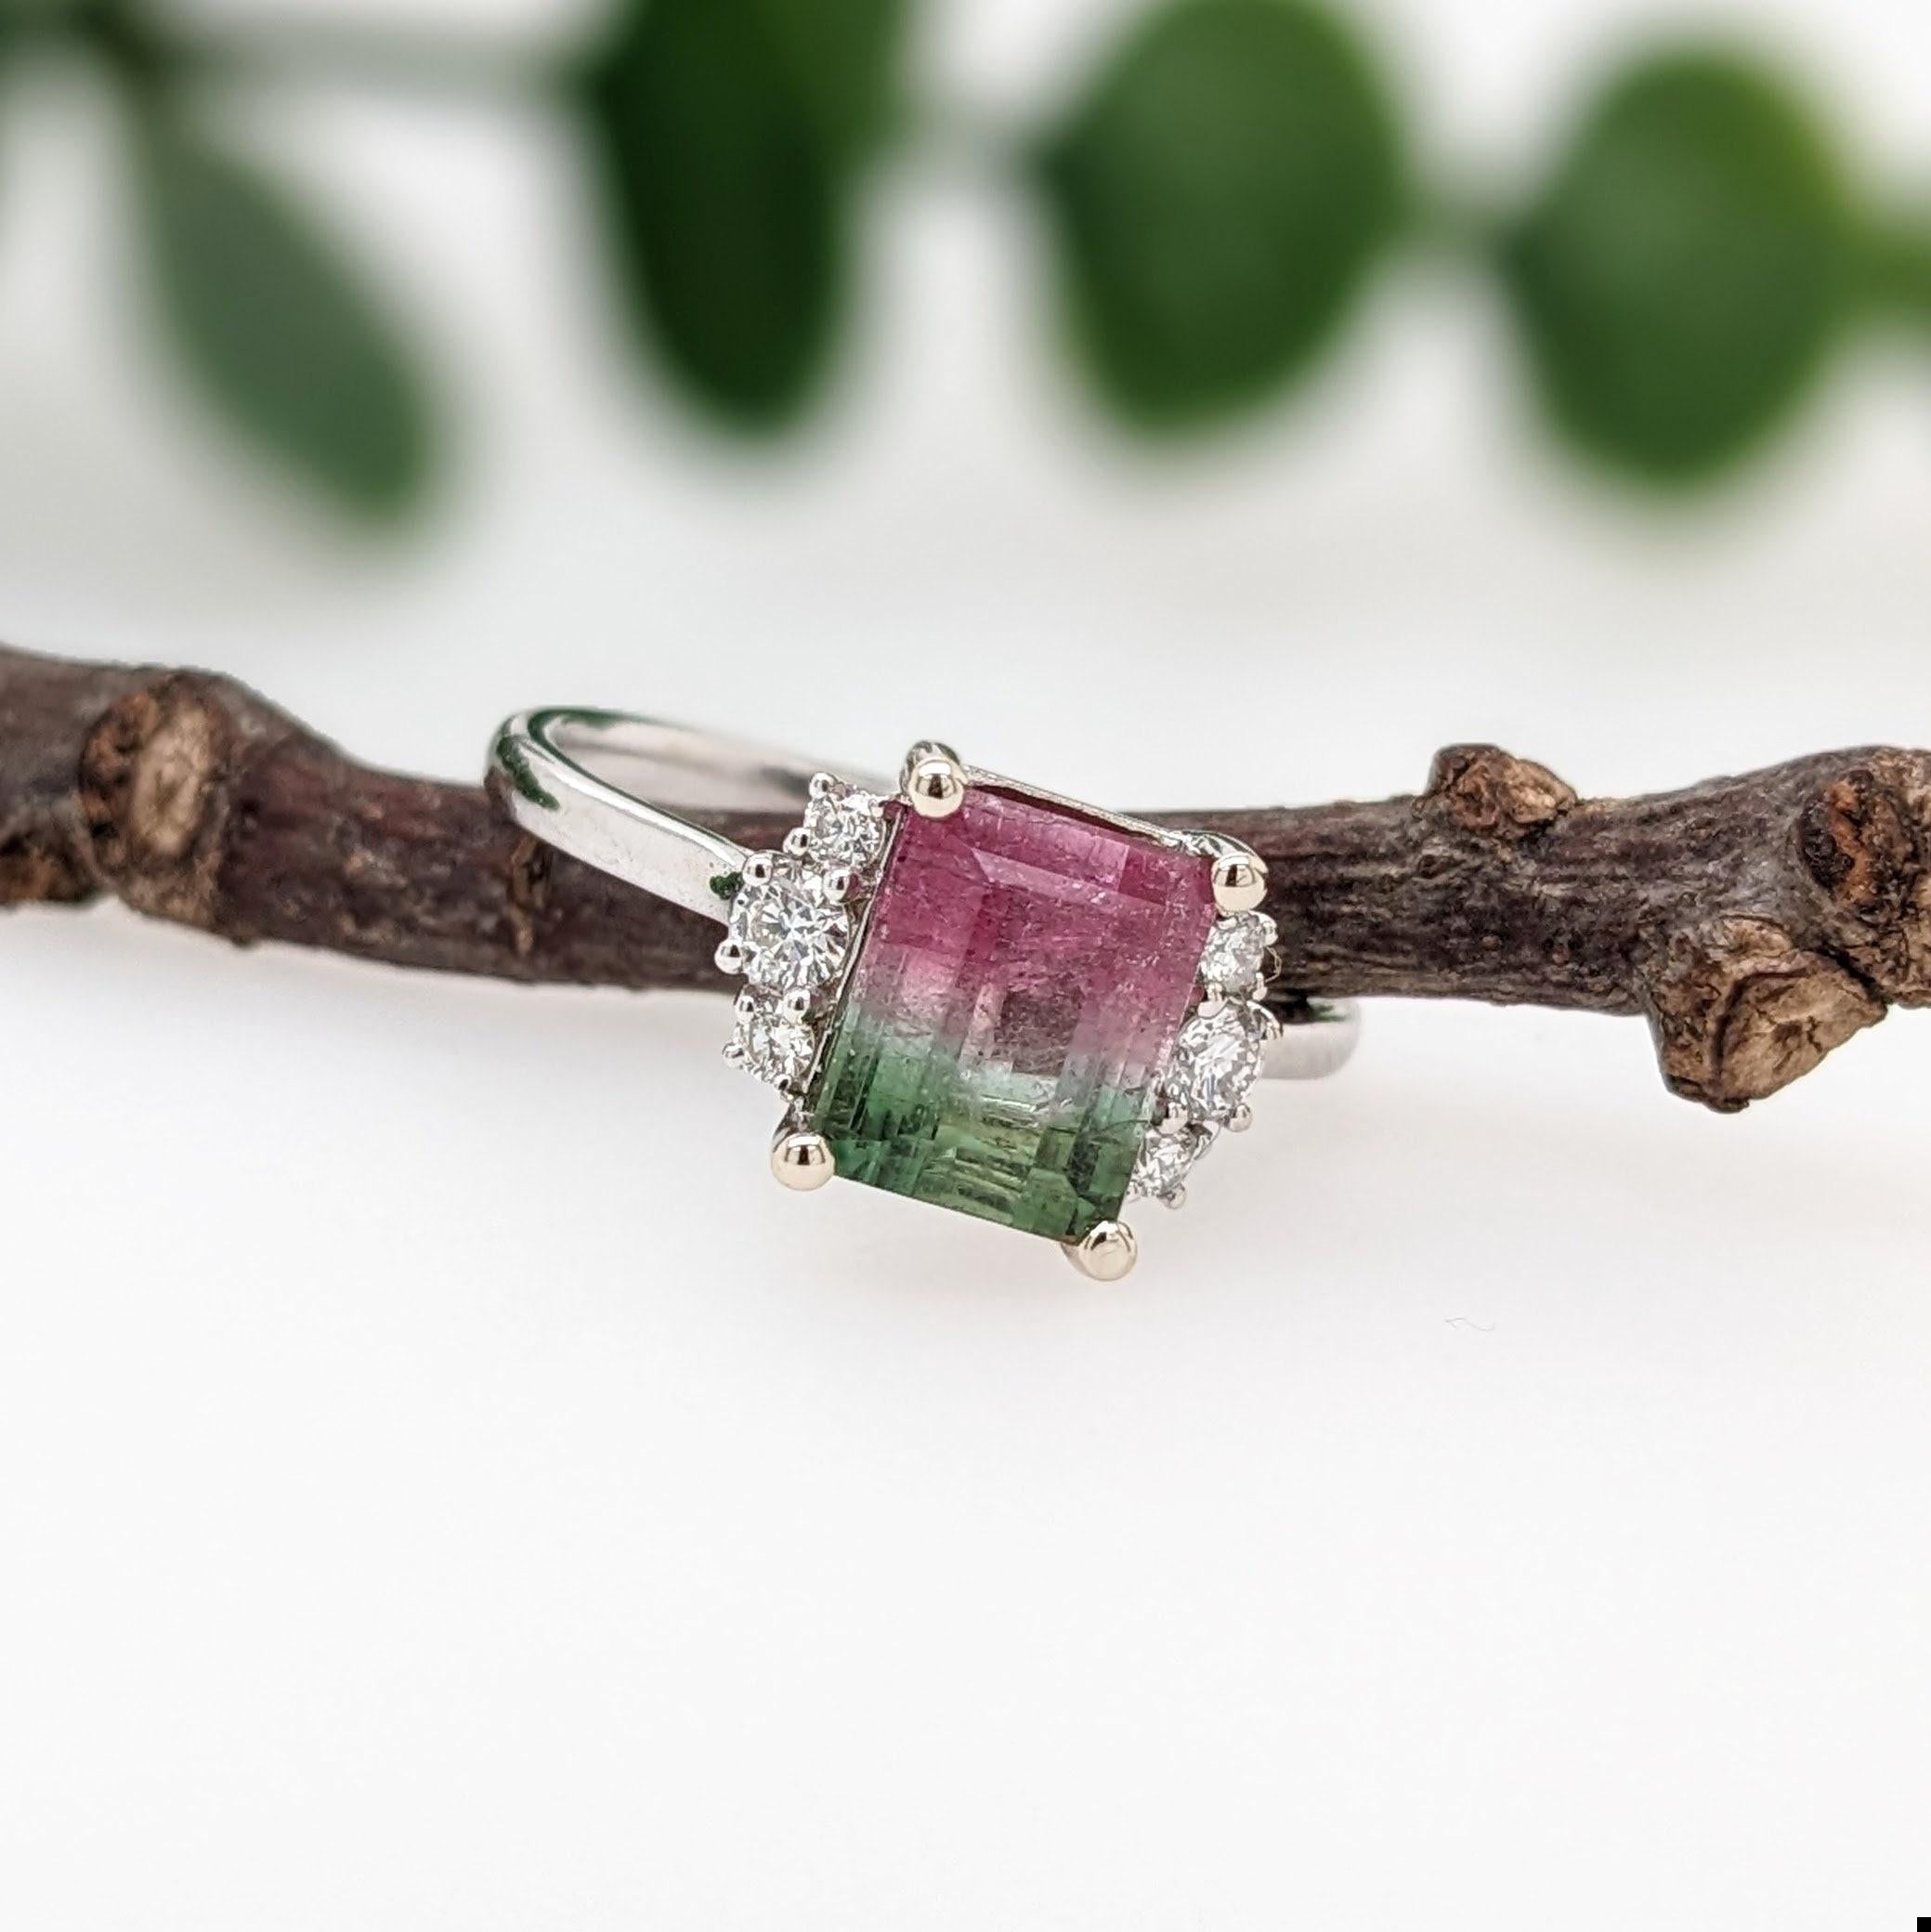 Fabulous Watermelon Tourmaline Ring in 14K White Gold w Natural Diamond Accents